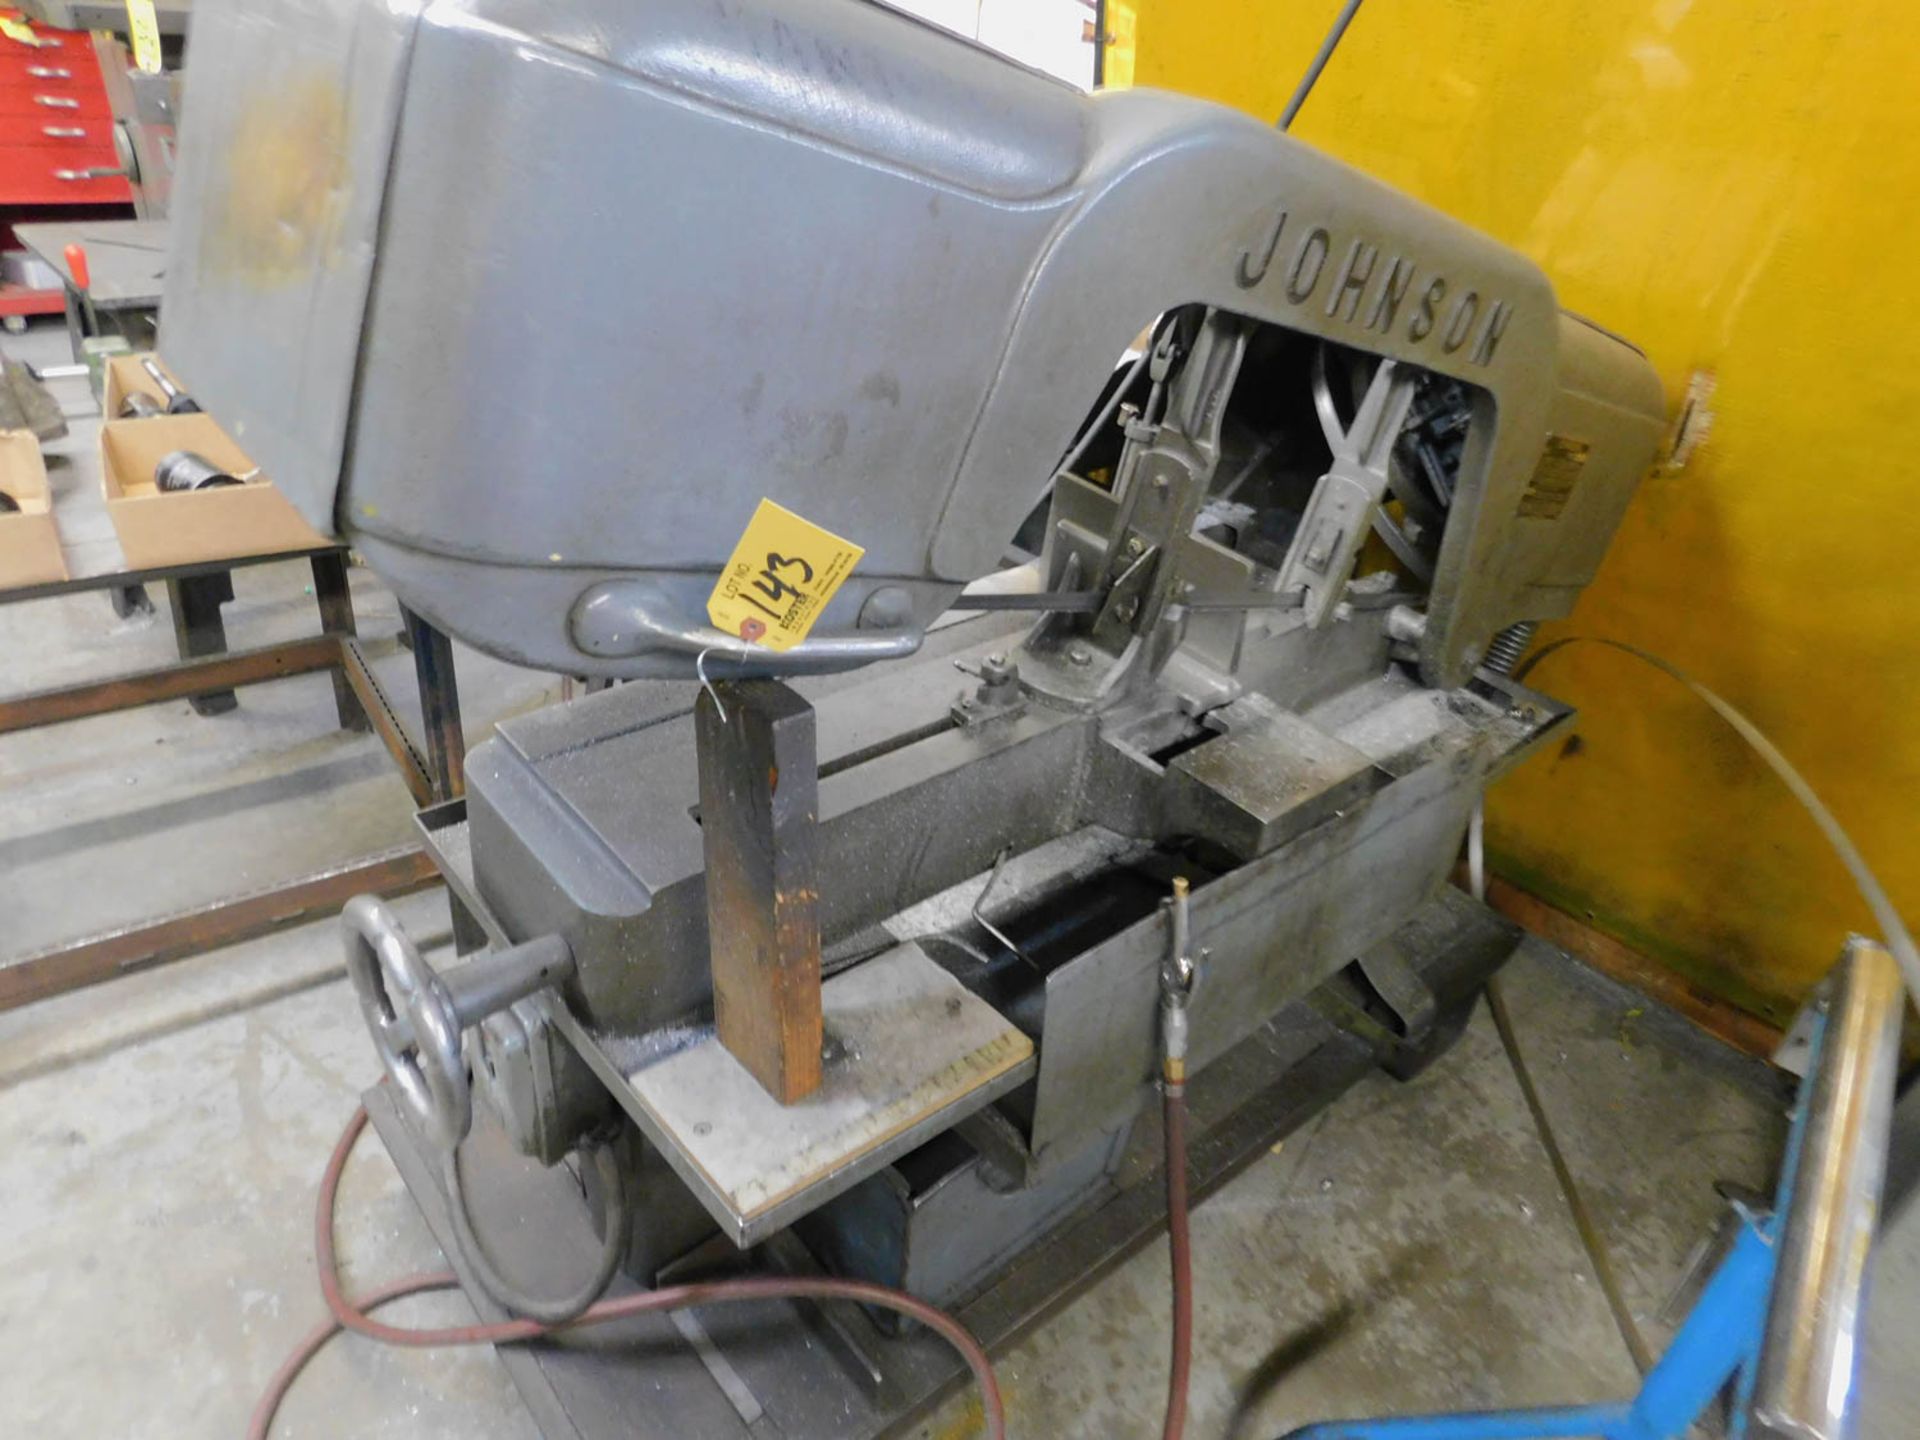 JOHNSON MDL. J HORIZONTAL BAND SAW, 18" OPENING, FEEDER STANDS, S/N: J-10856